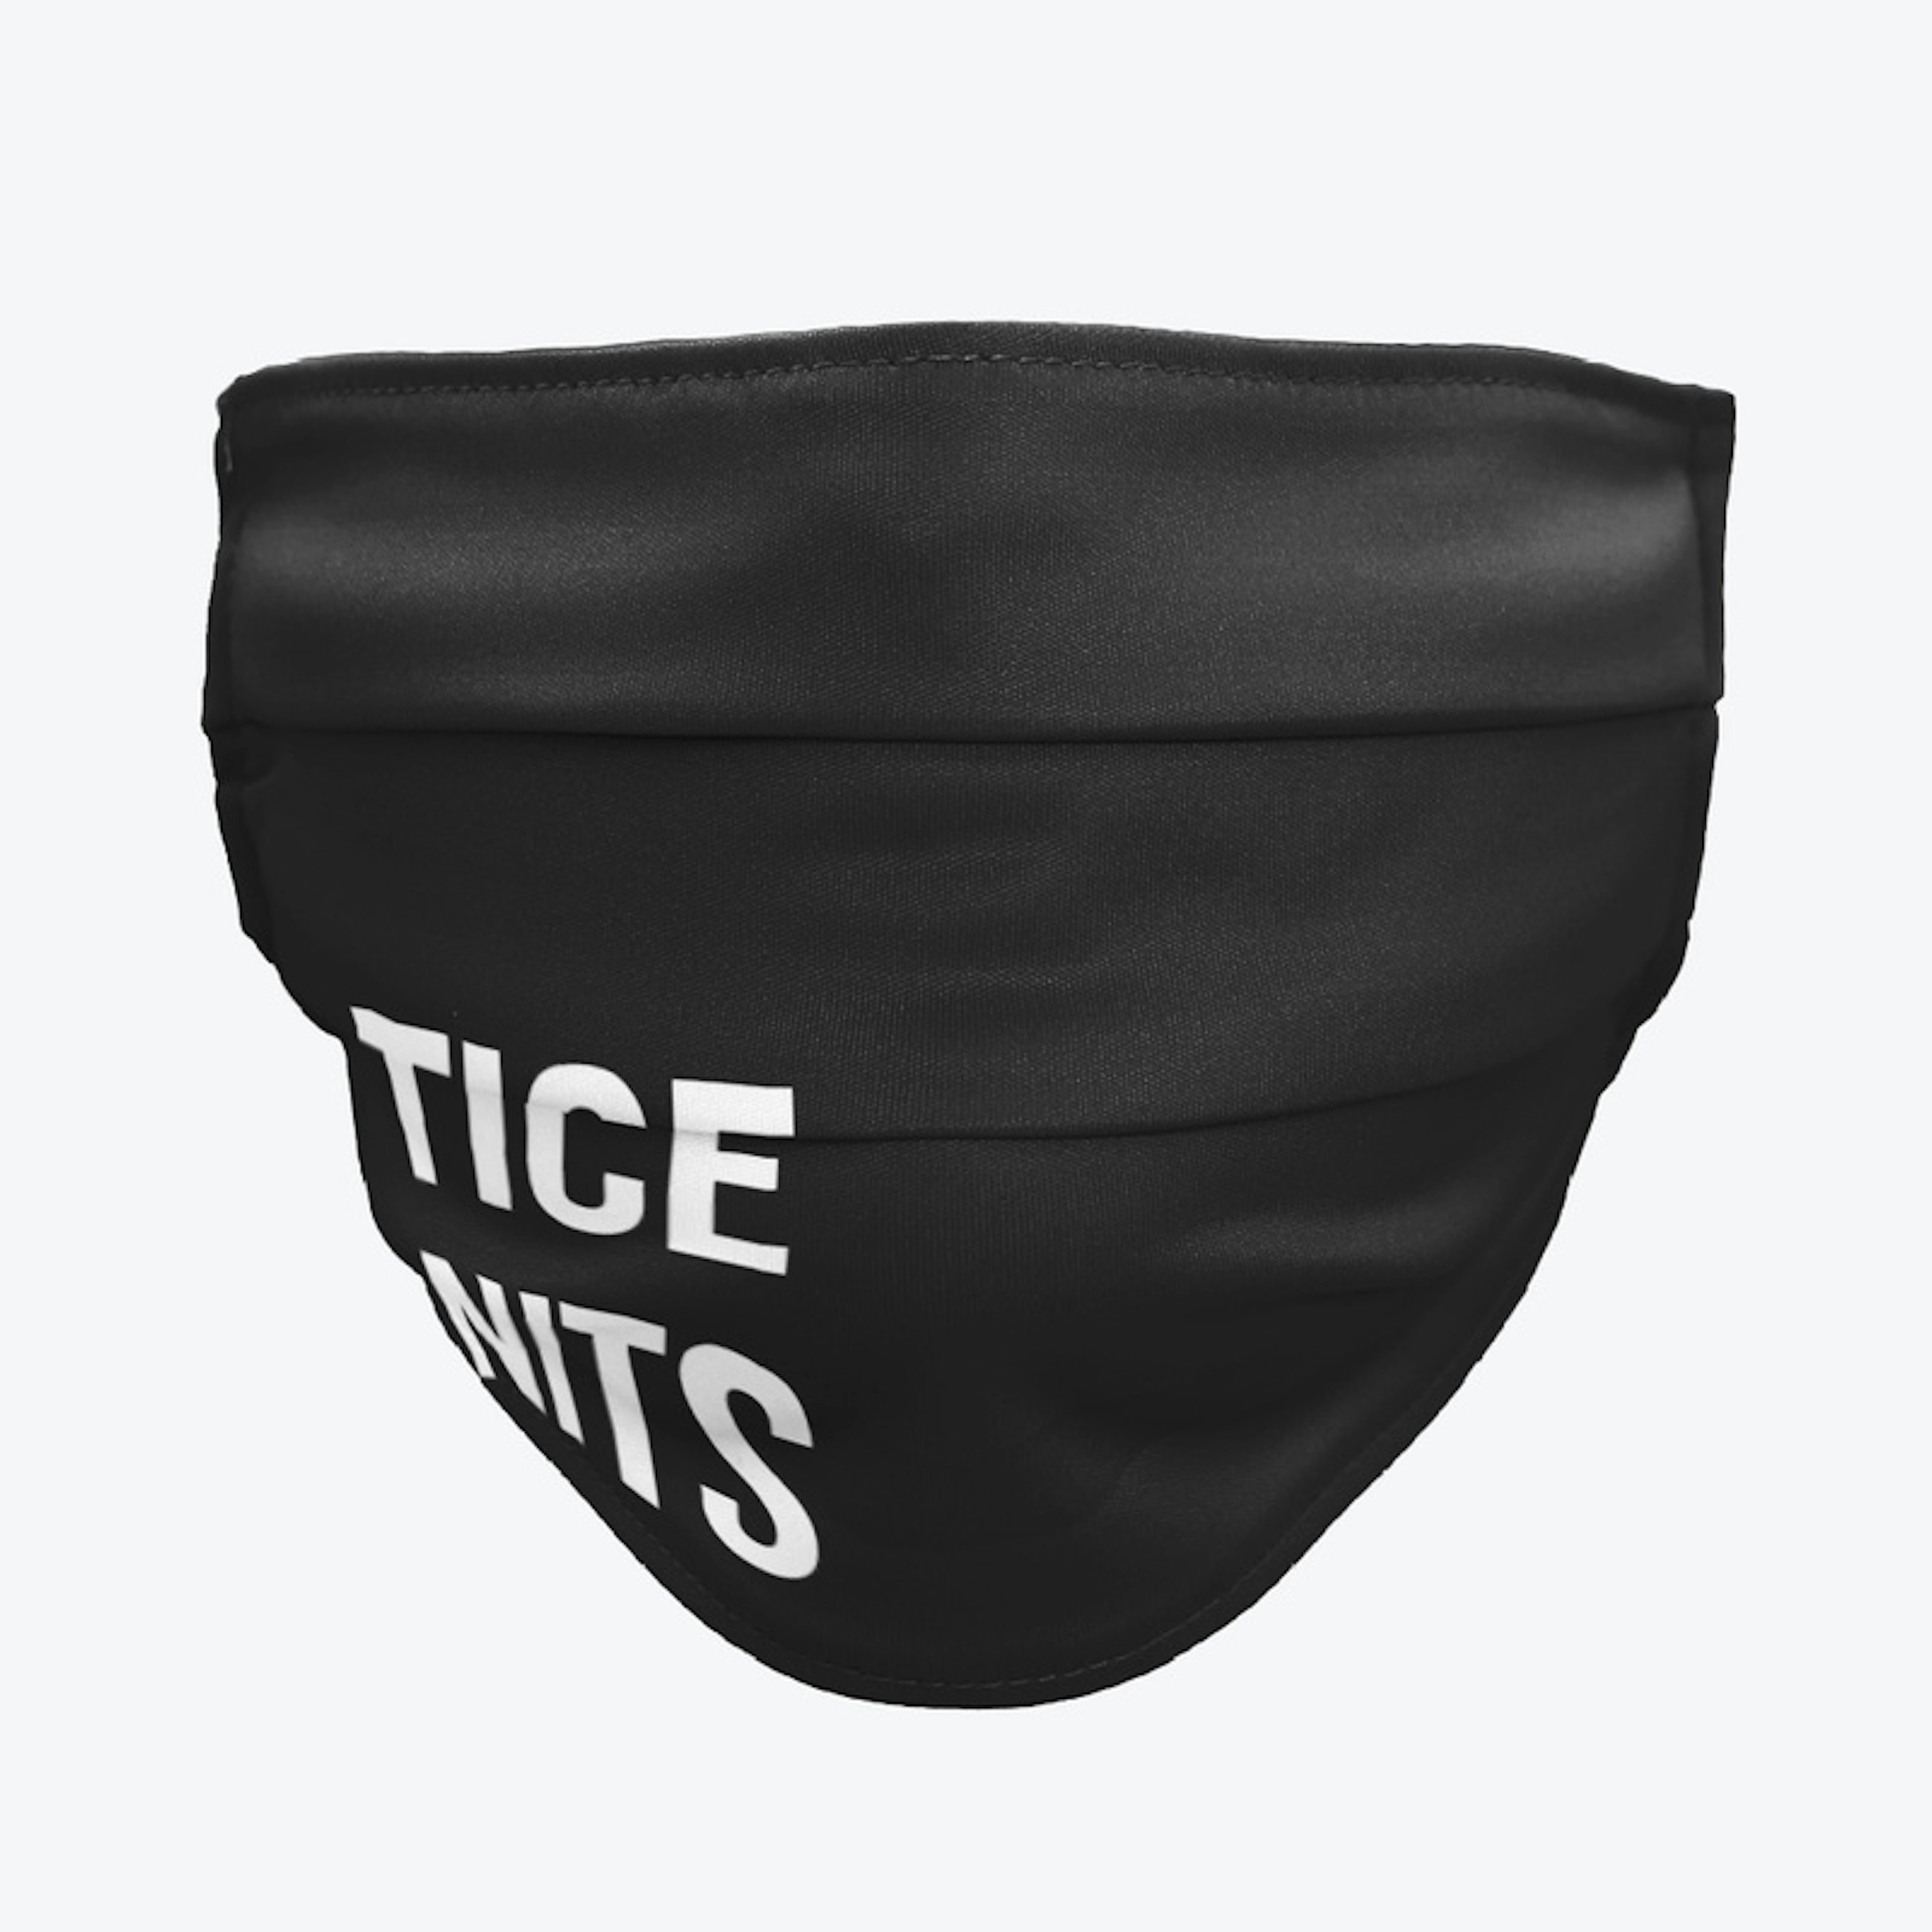 TICE NITS FACE MASK